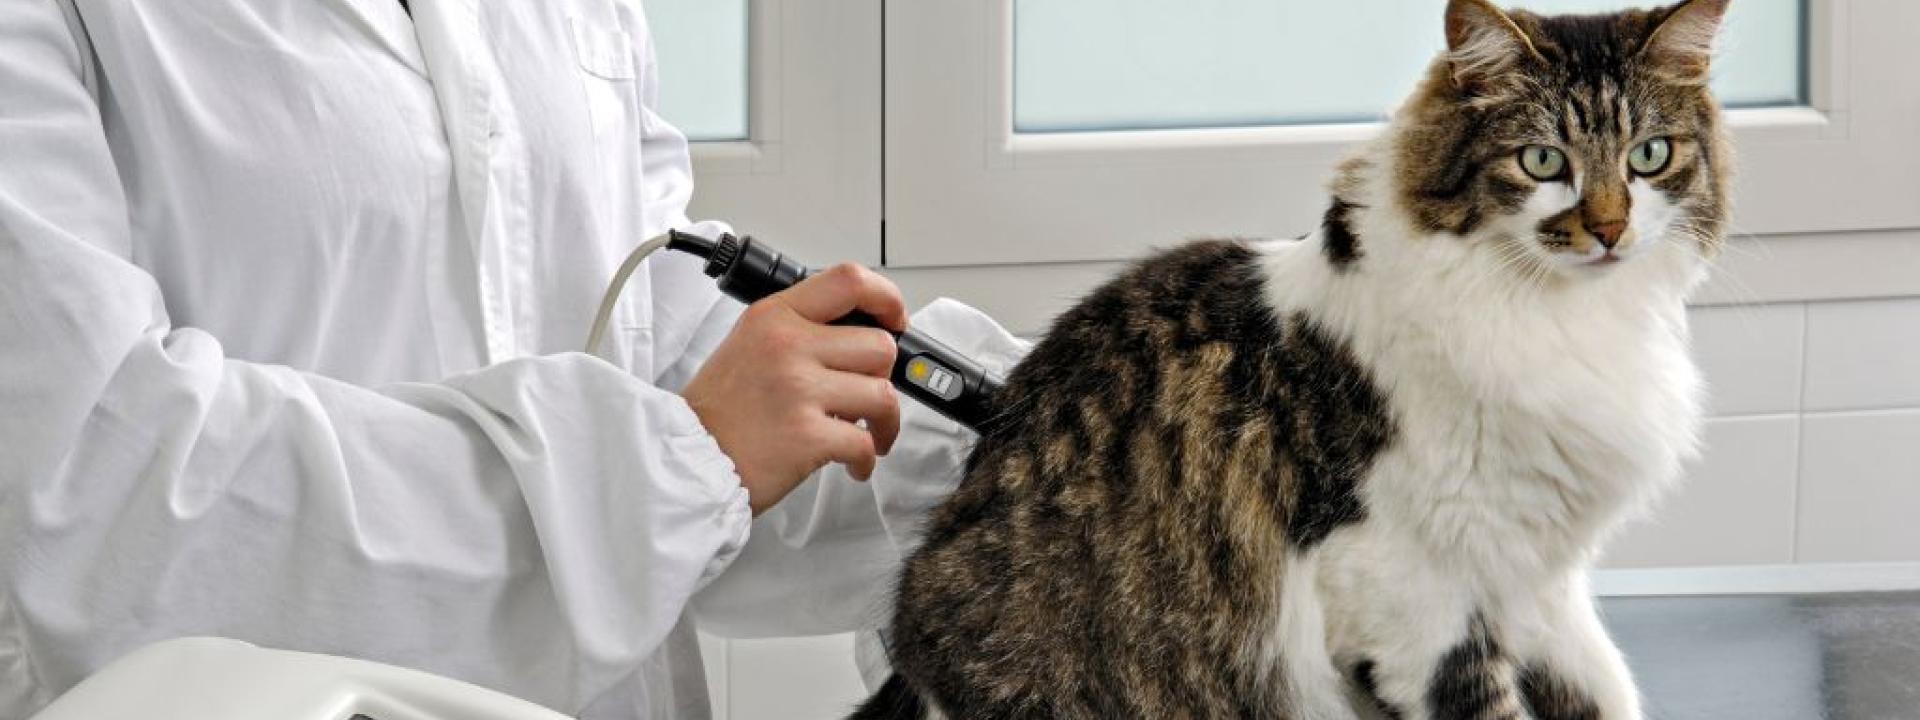 A veterinarian gives laser therapy to a cat